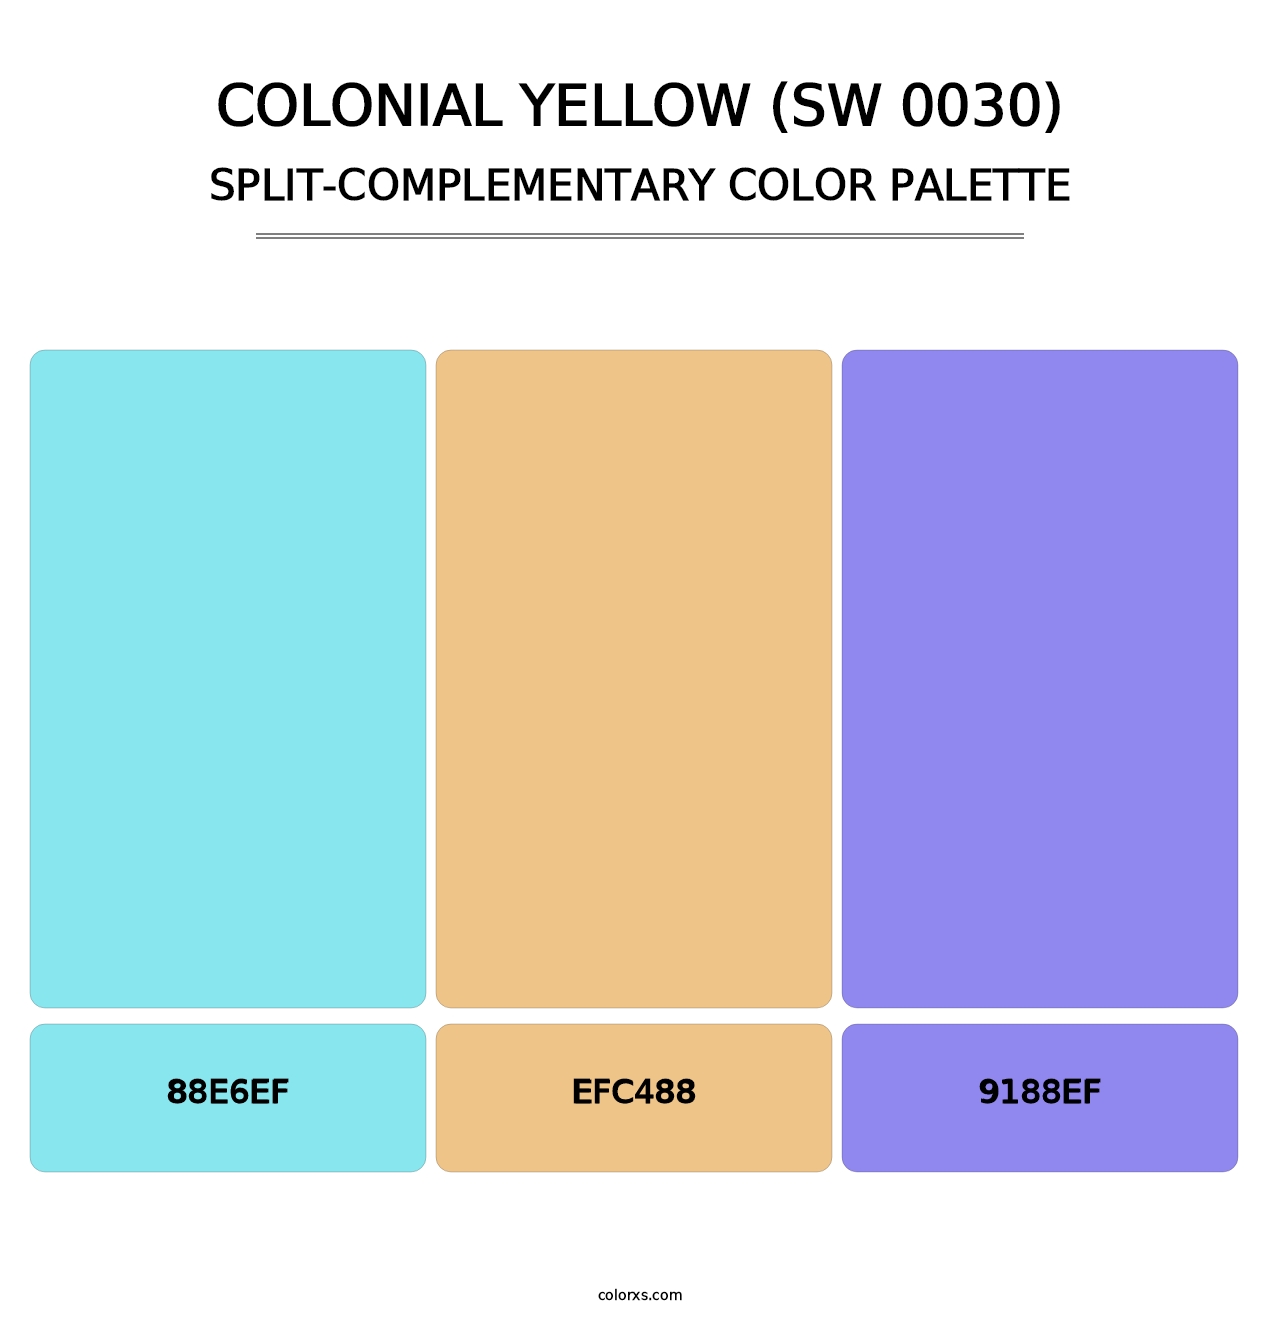 Colonial Yellow (SW 0030) - Split-Complementary Color Palette